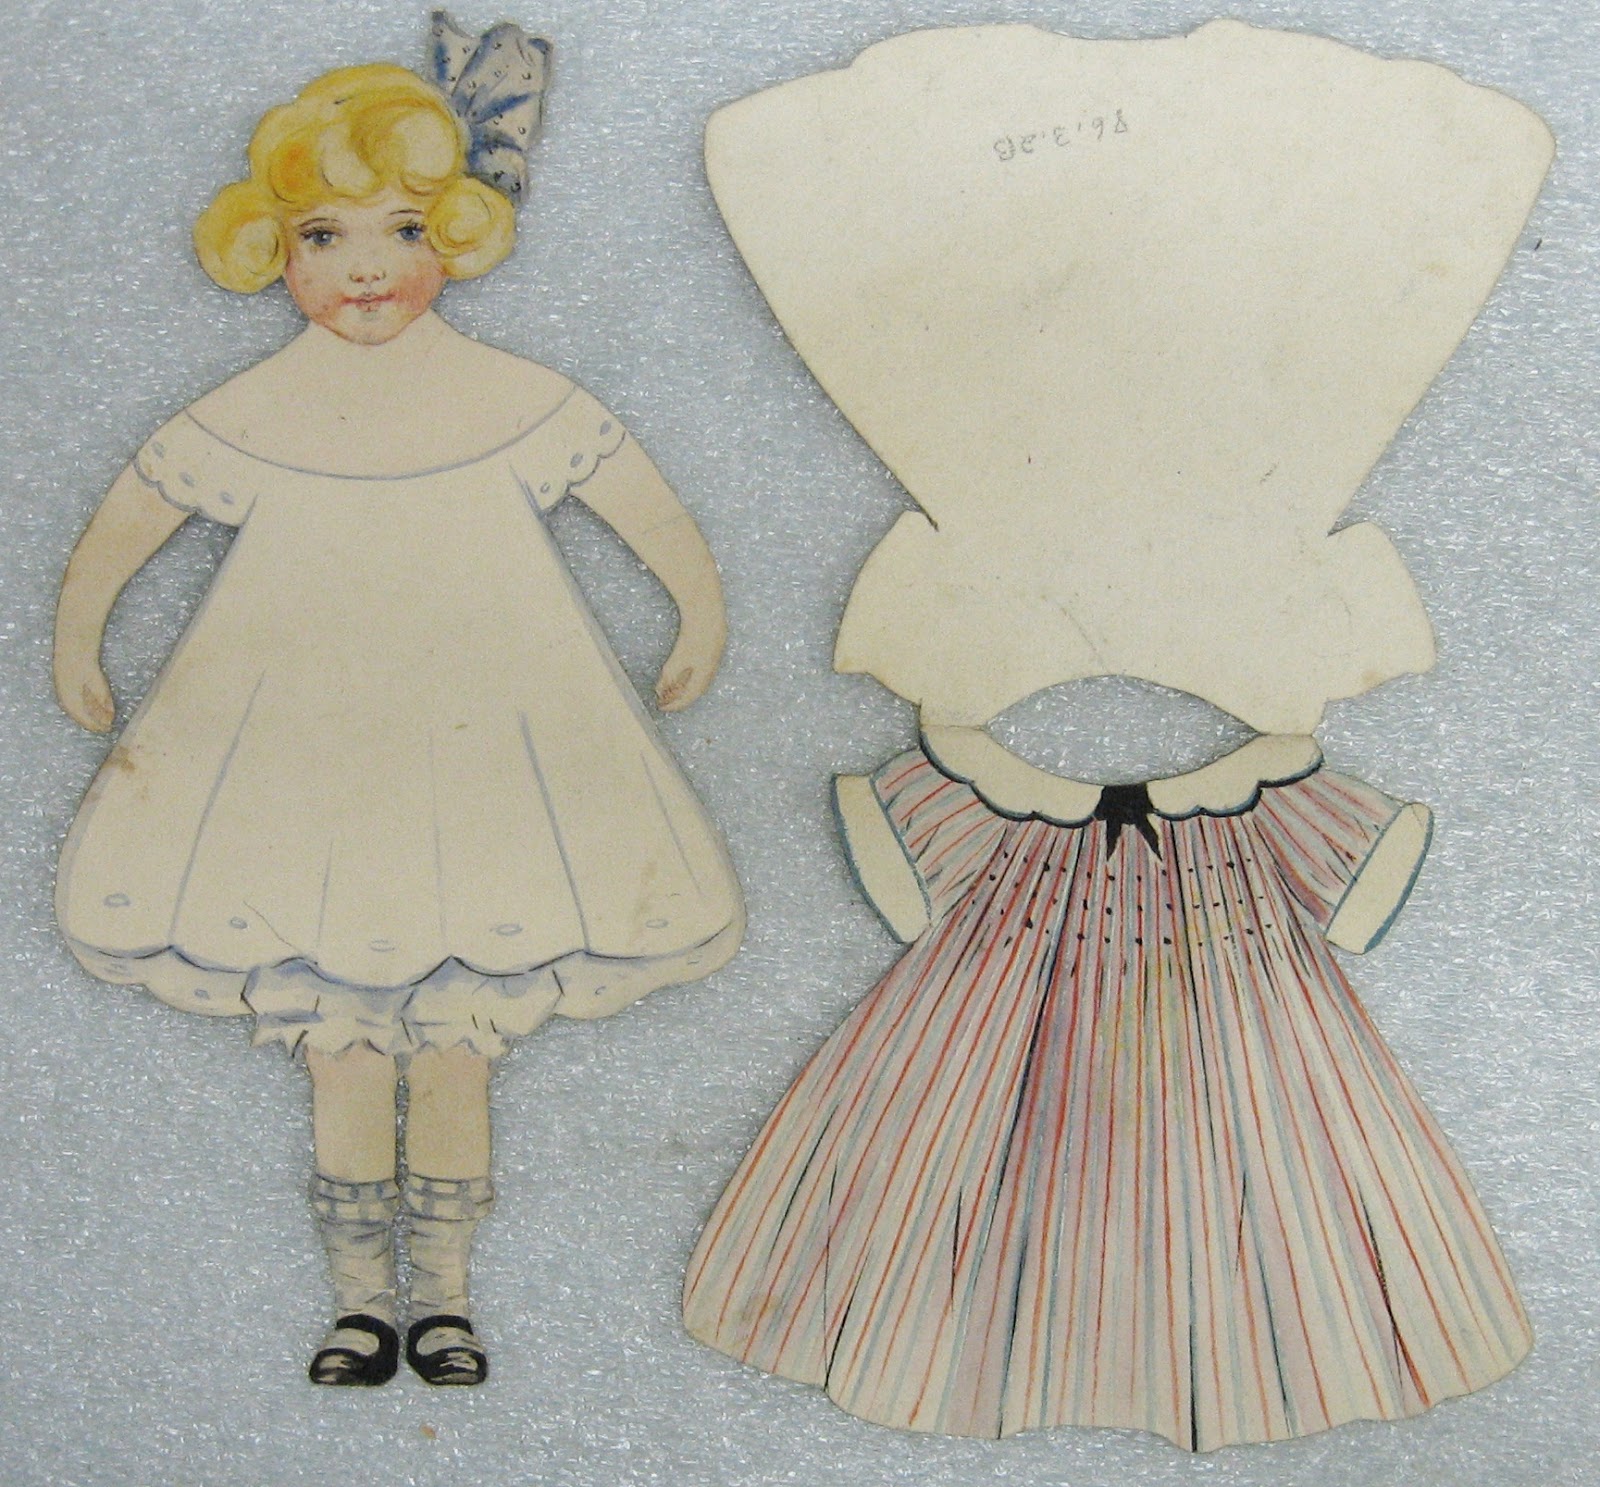 Chemung County Historical Society: Paper Dolls in Paper Dresses